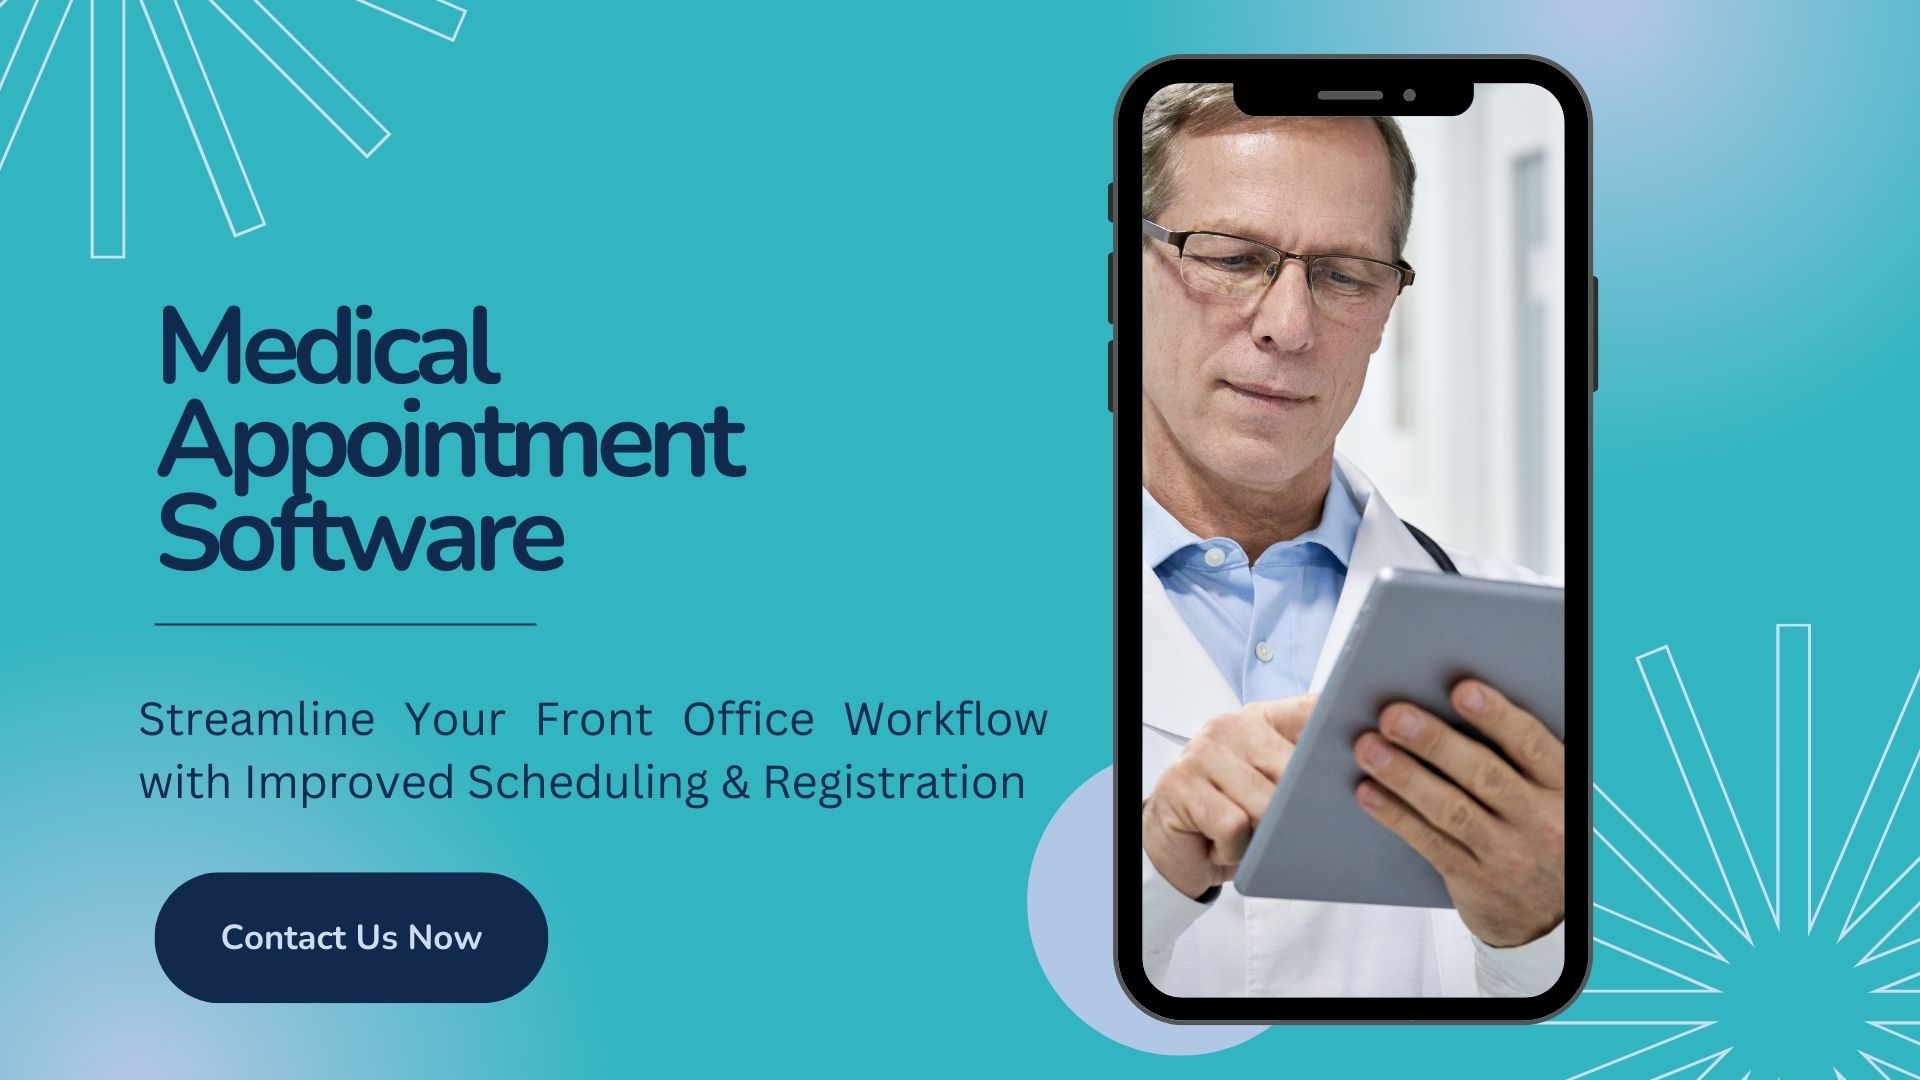 Medical
Appointment
Software

Streamline Your Front Office Workflow
with Improved Scheduling &amp; Registration